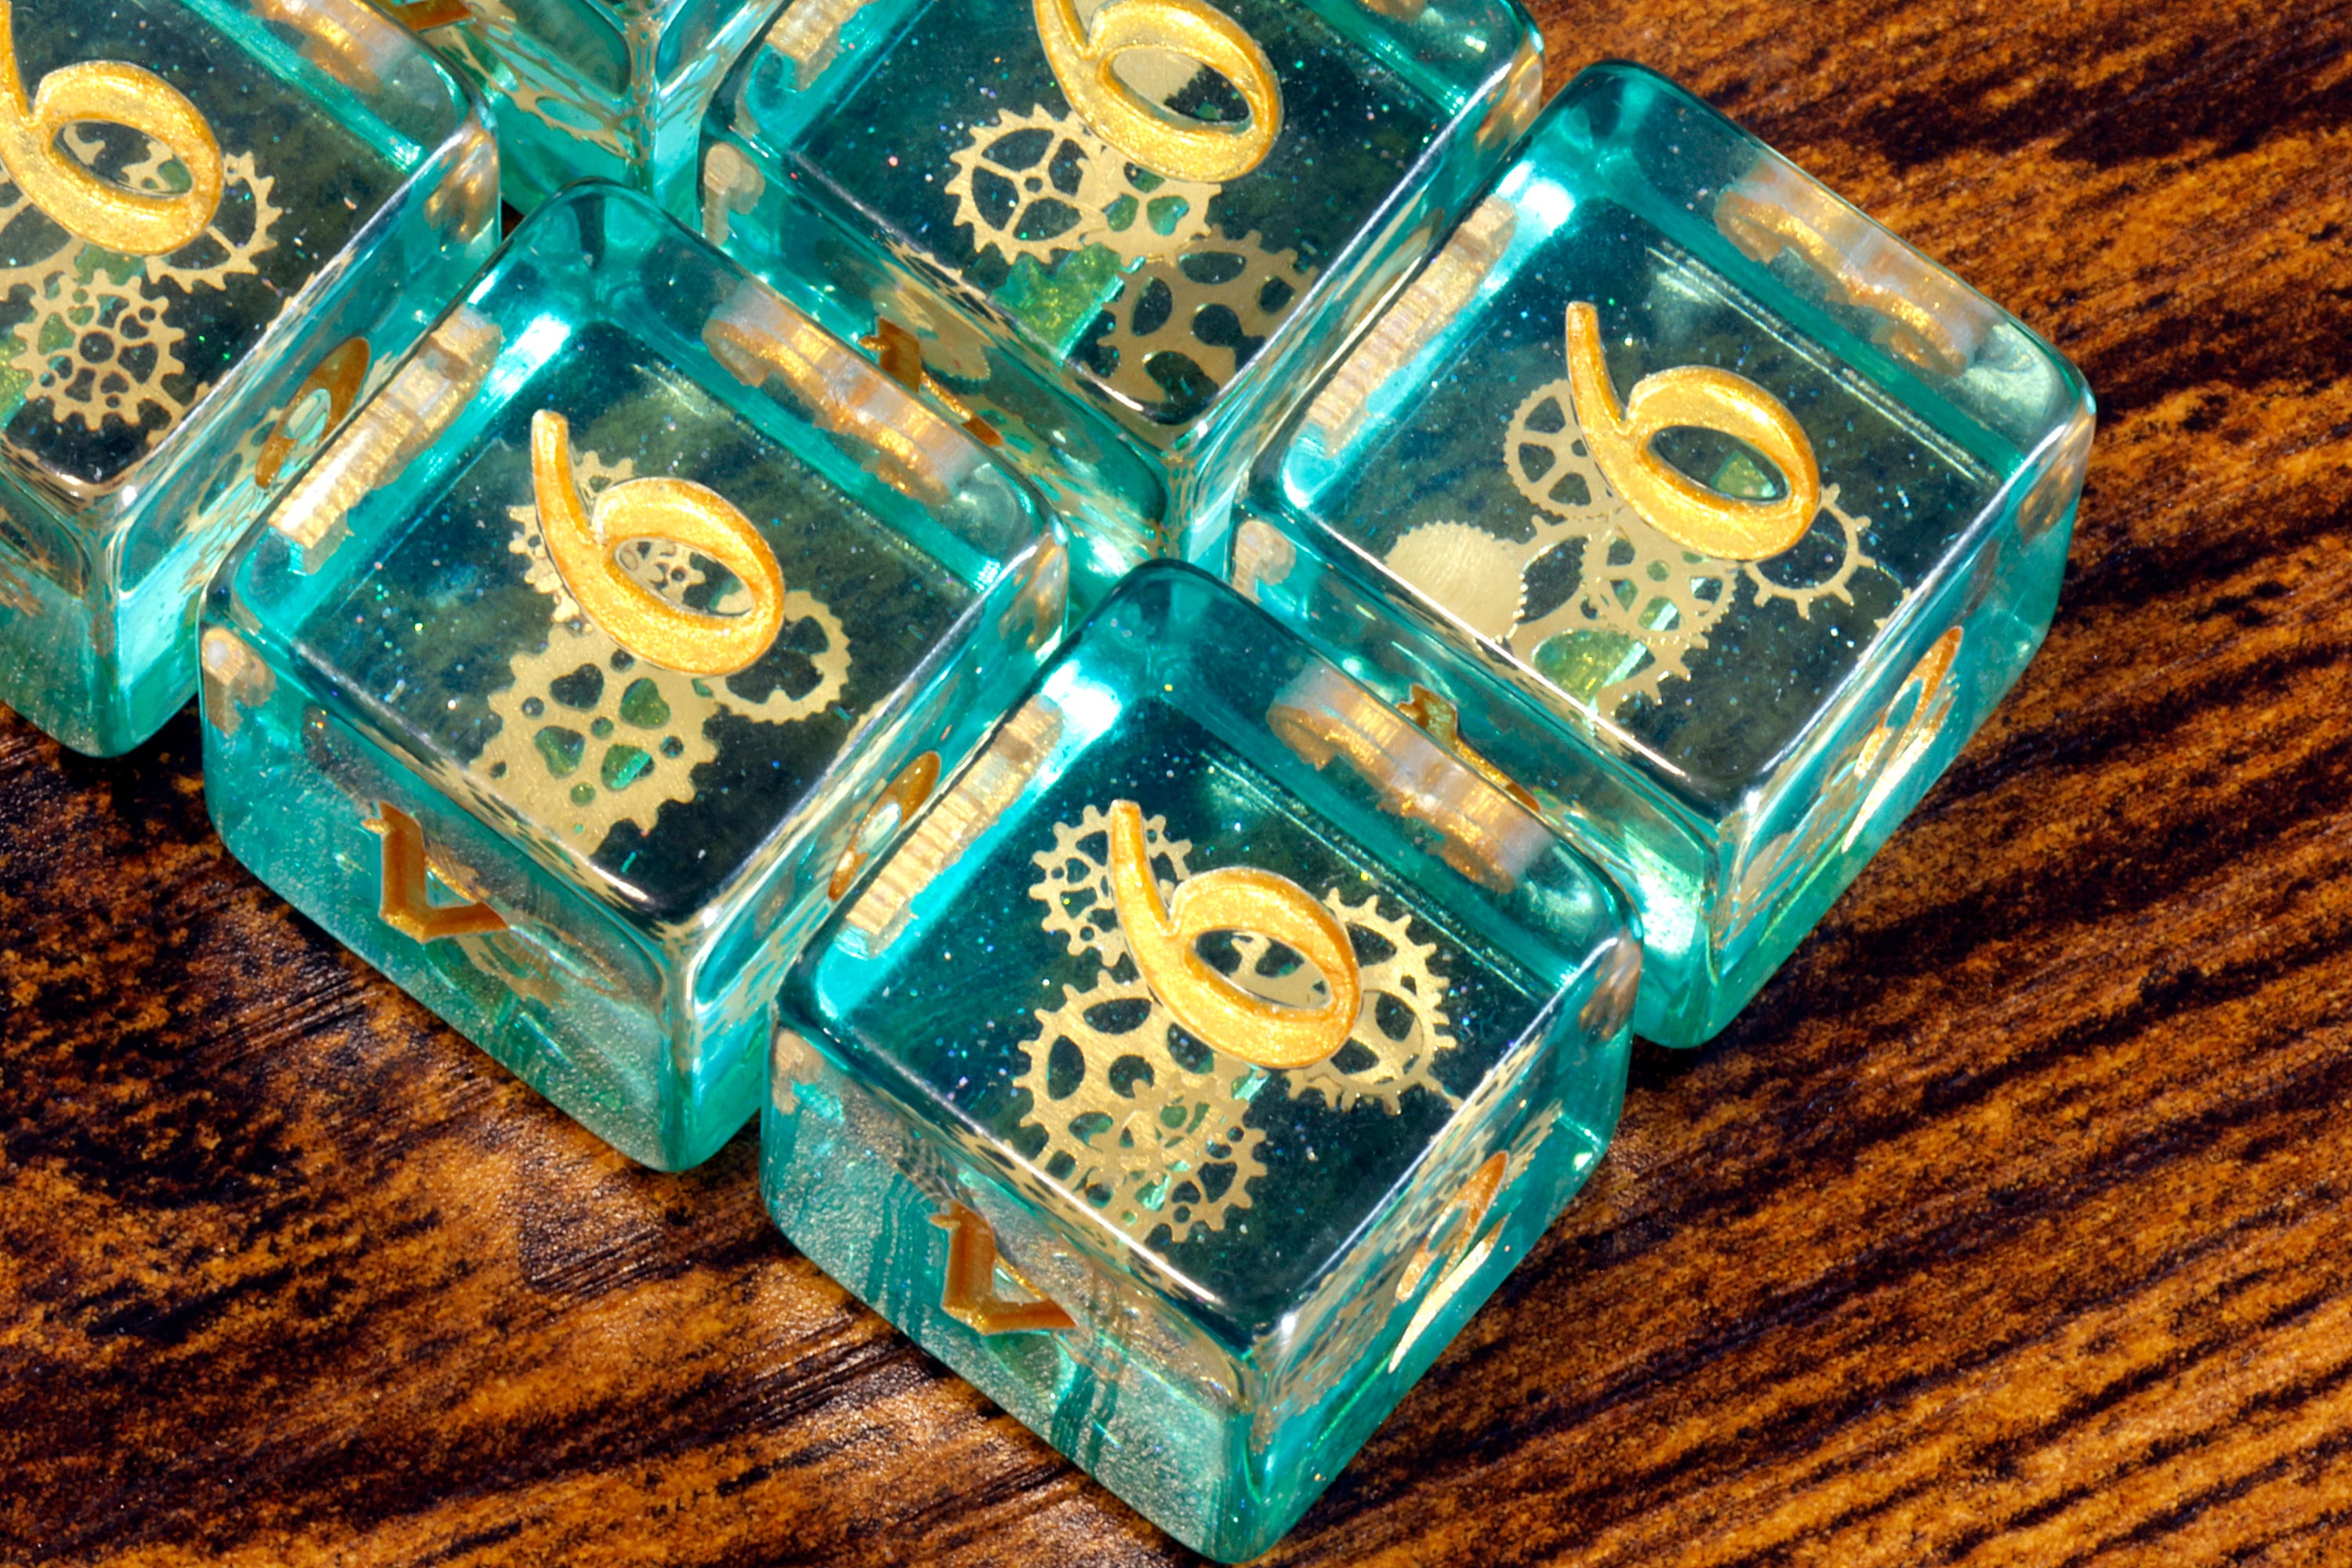 Ethereal Sprockets D6 Dice, Blue green glittery layer with small golden gear inclusions